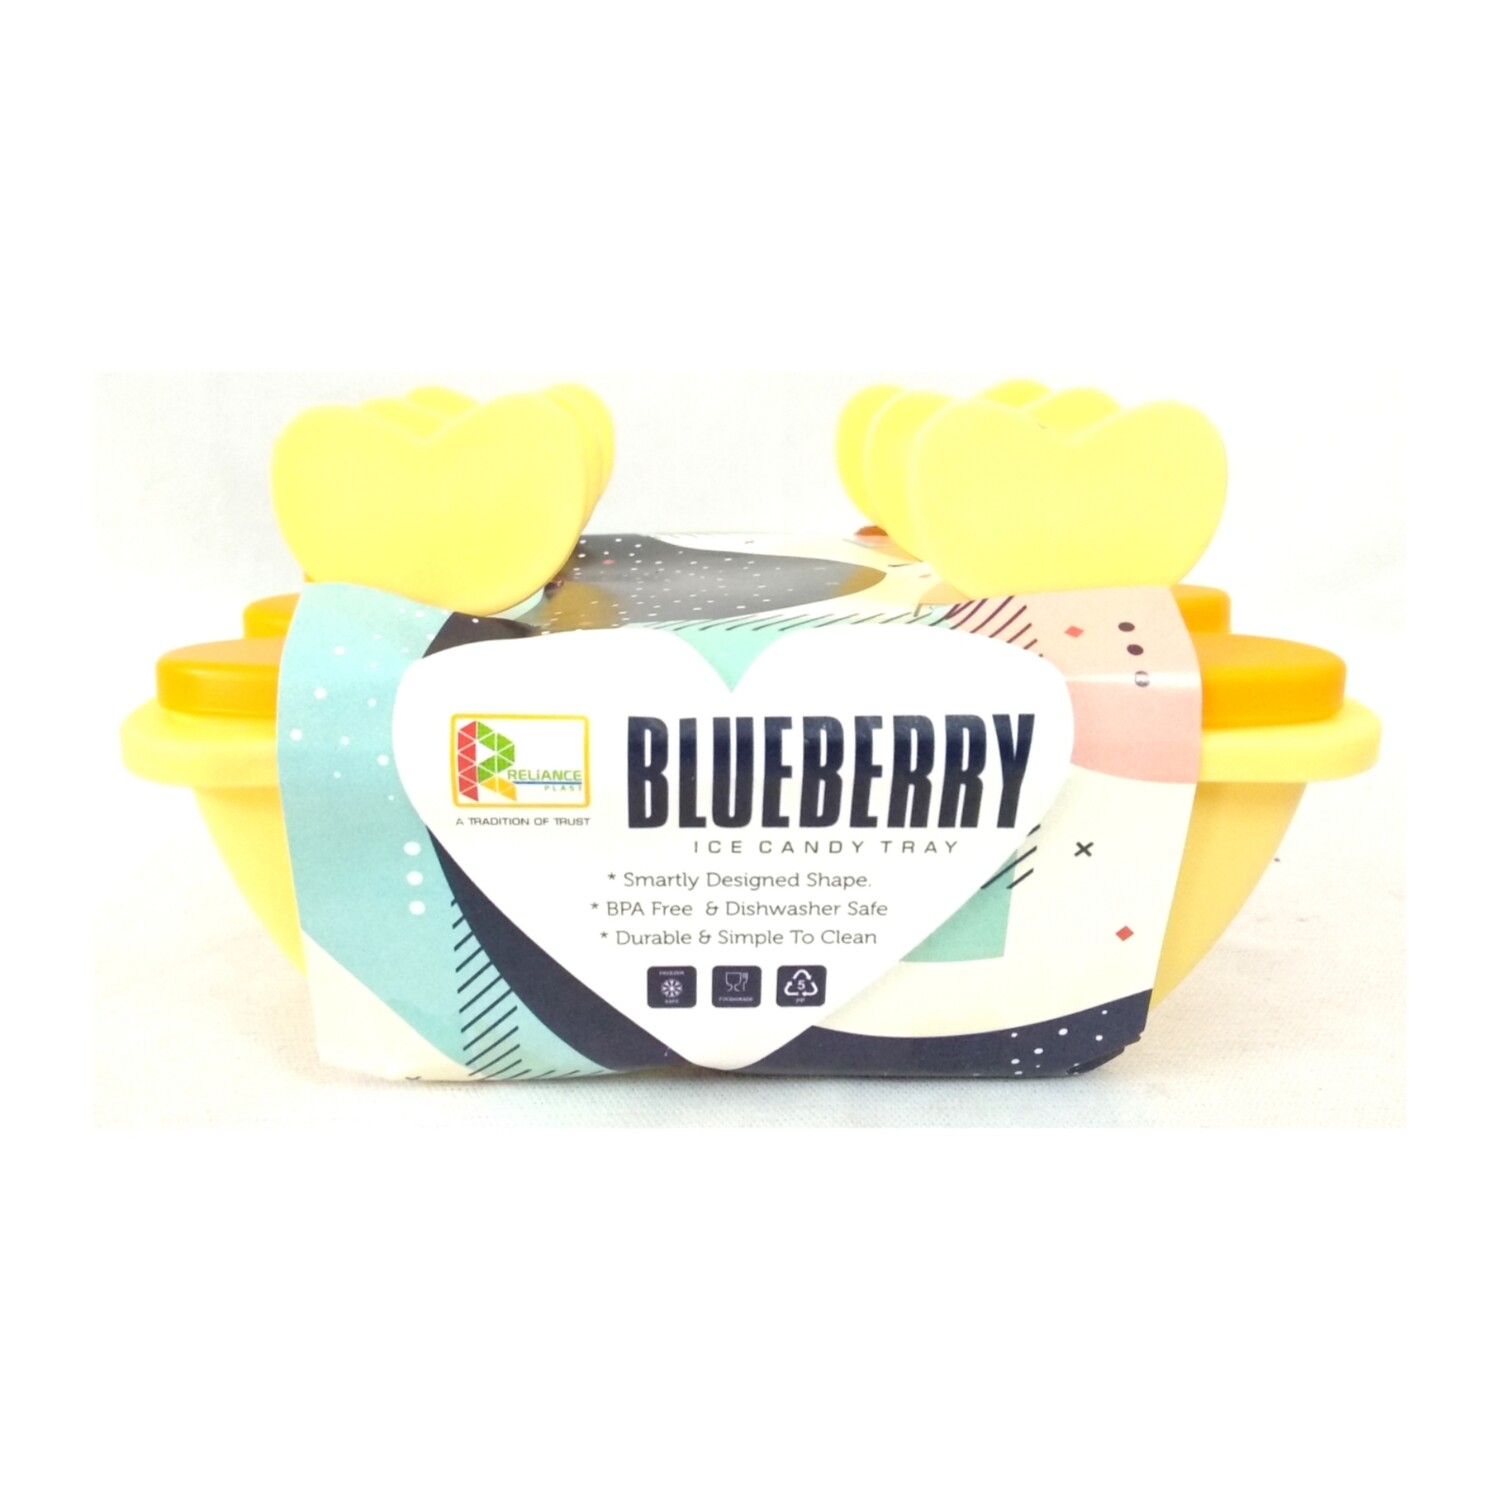 Blue Berry Ice Candy Tray - 6 Pcs Cubes